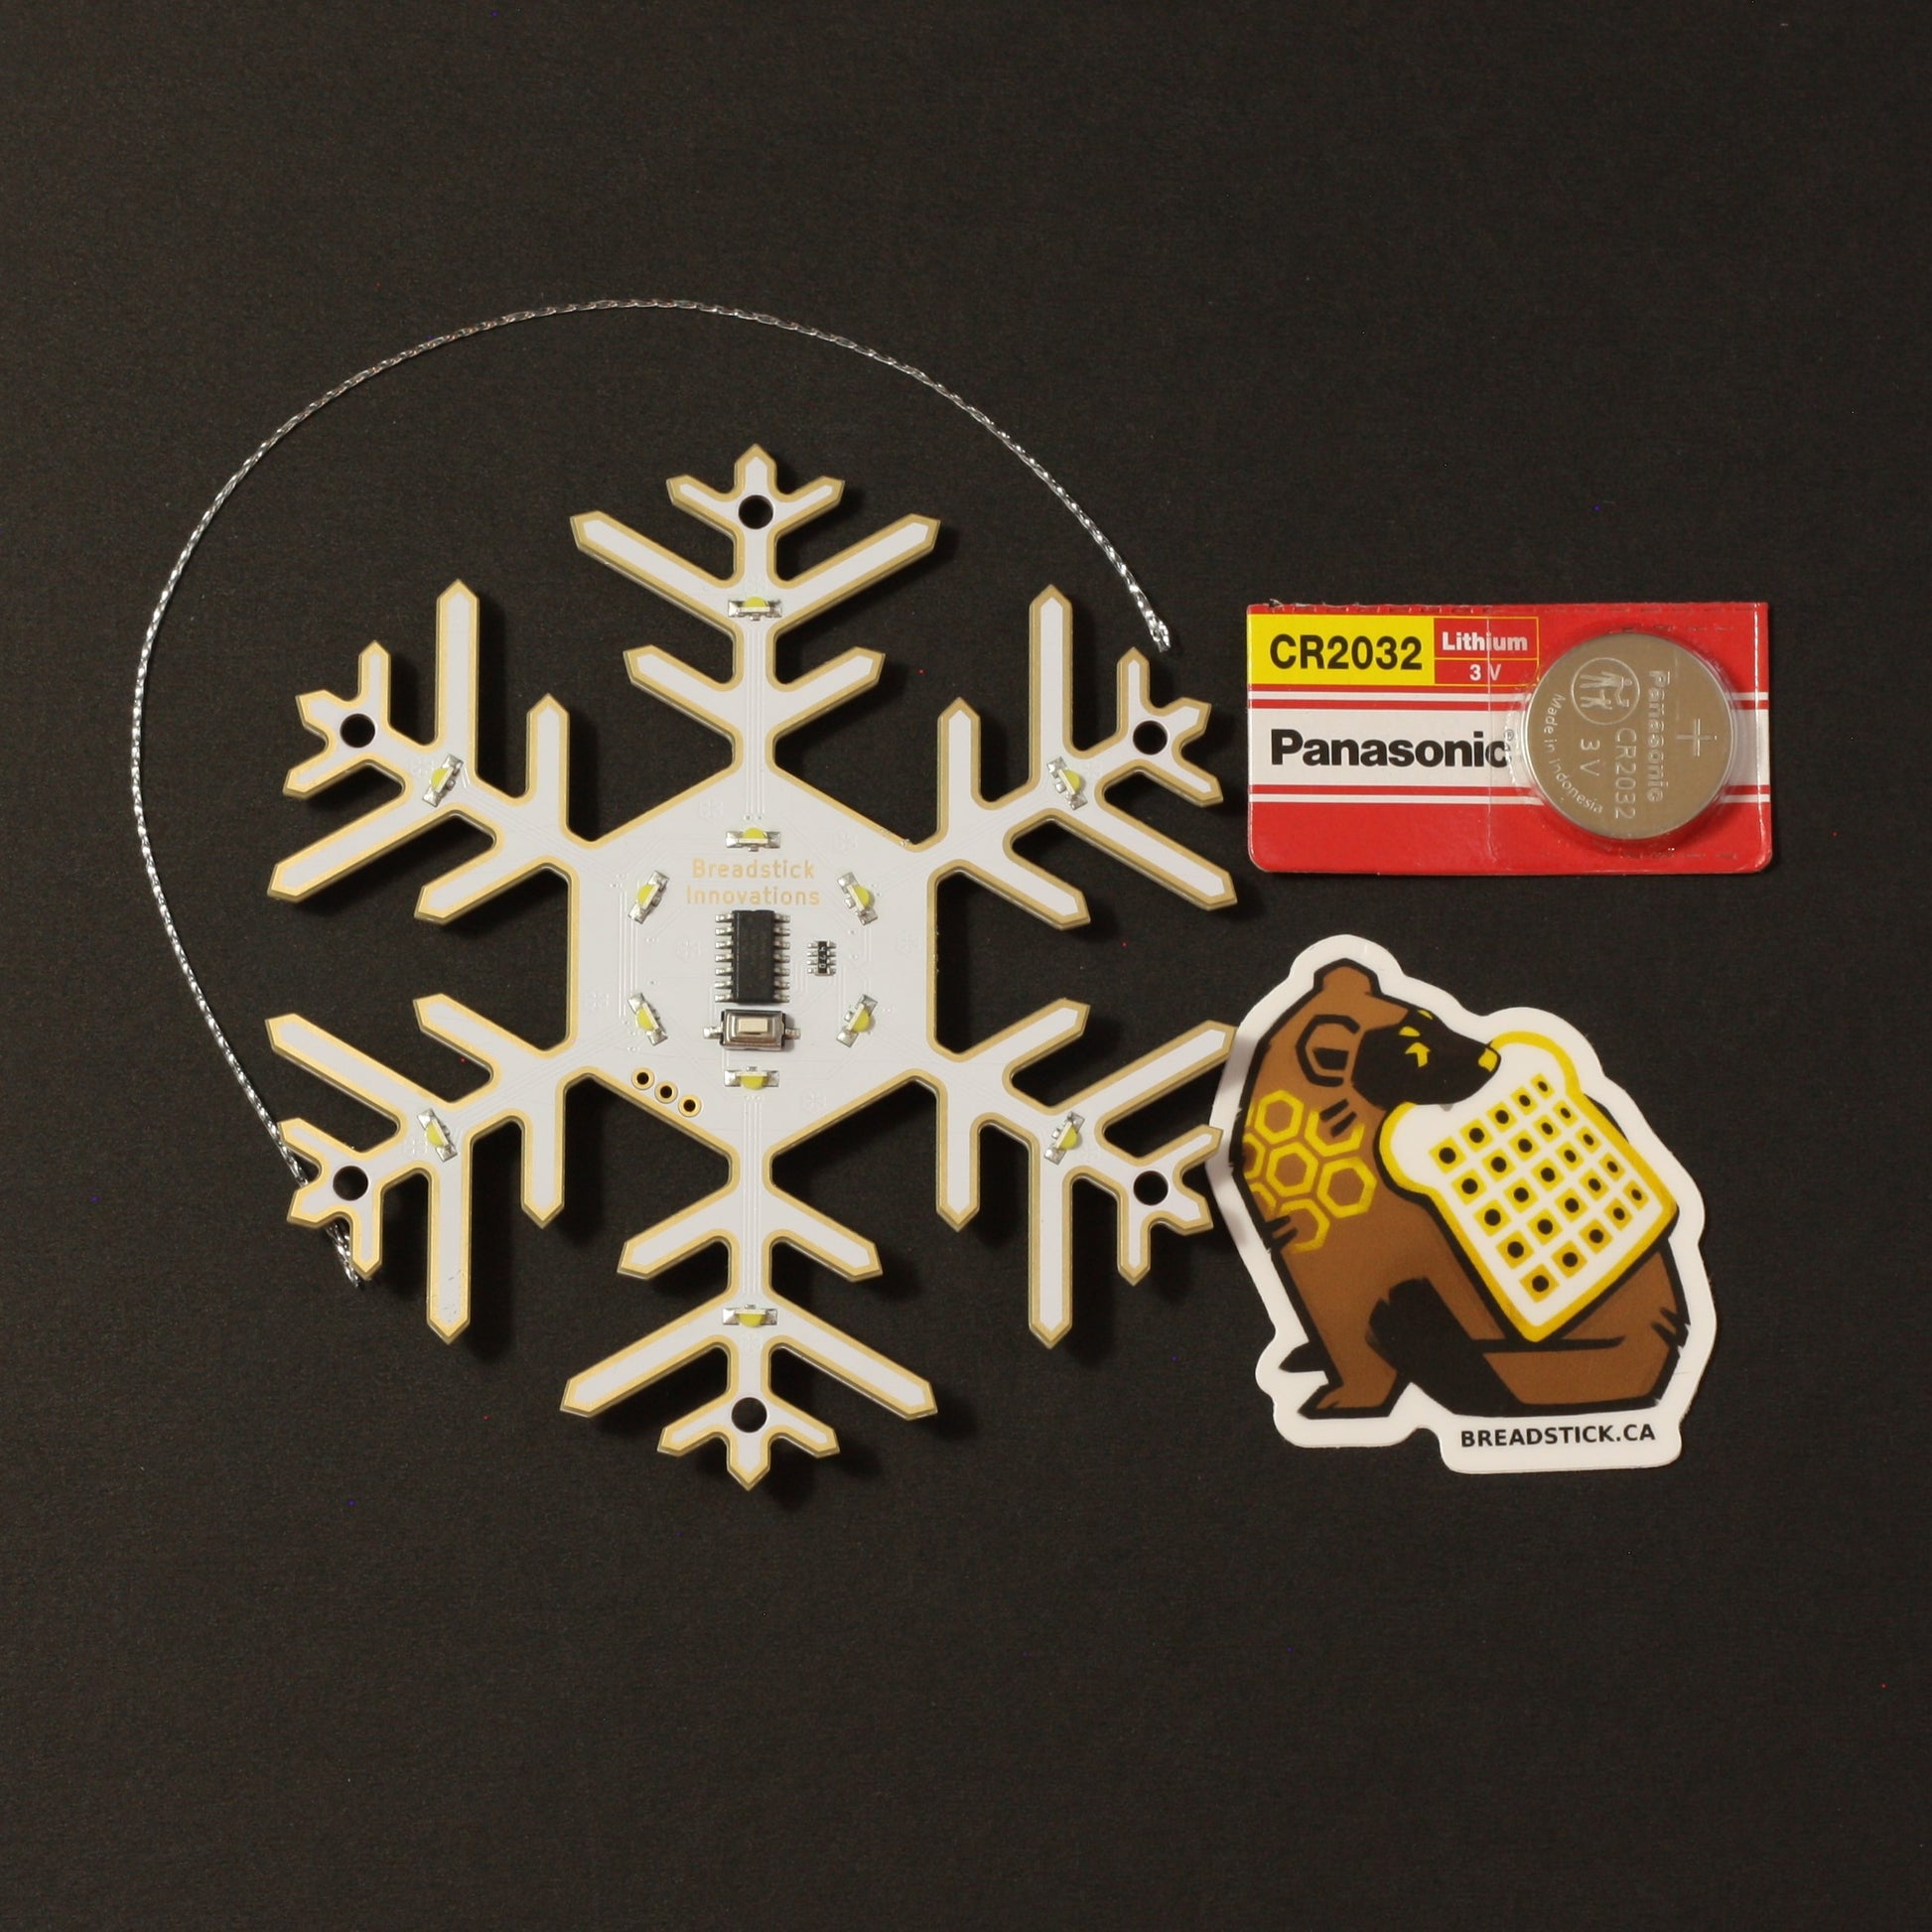 Snowflake - LED ornament with battery - Breadstick Innovations